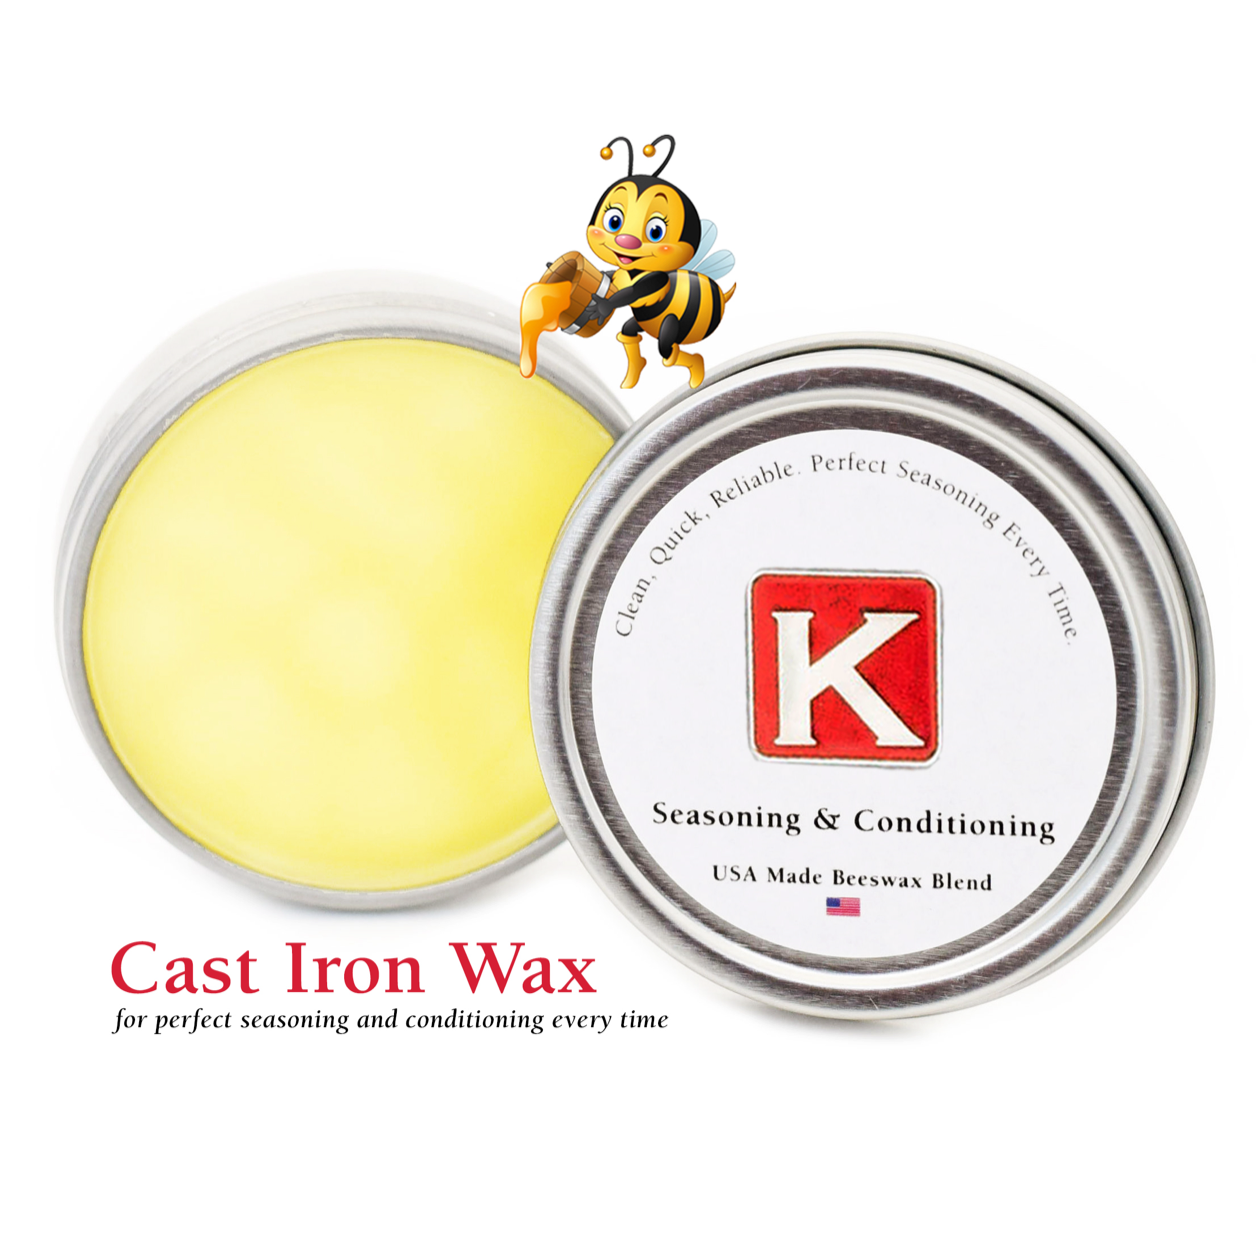 Cast Iron Seasoning Oil Lancaster Cast Iron Beeswax Blend for